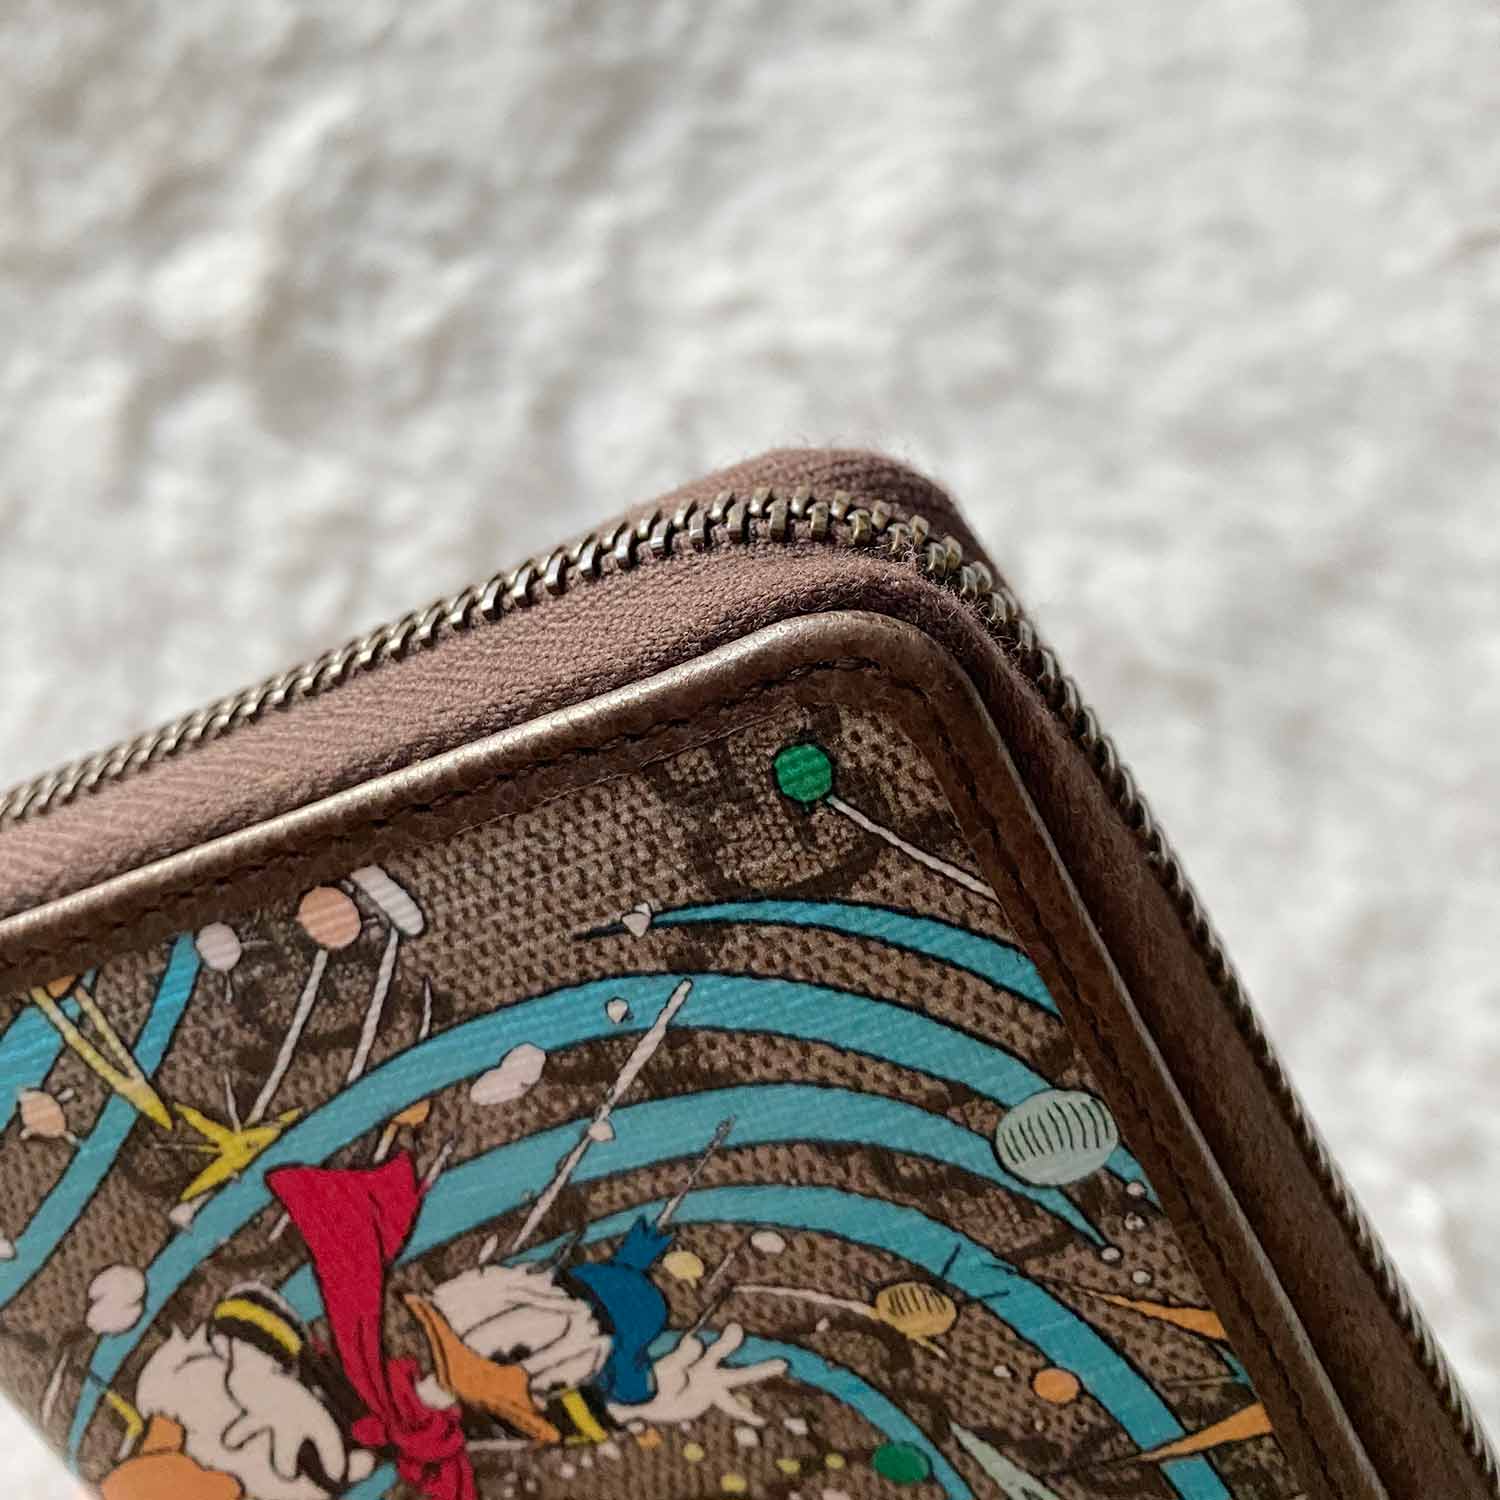 Gucci x Disney Beige GG Supreme Canvas and Leather Donald Duck